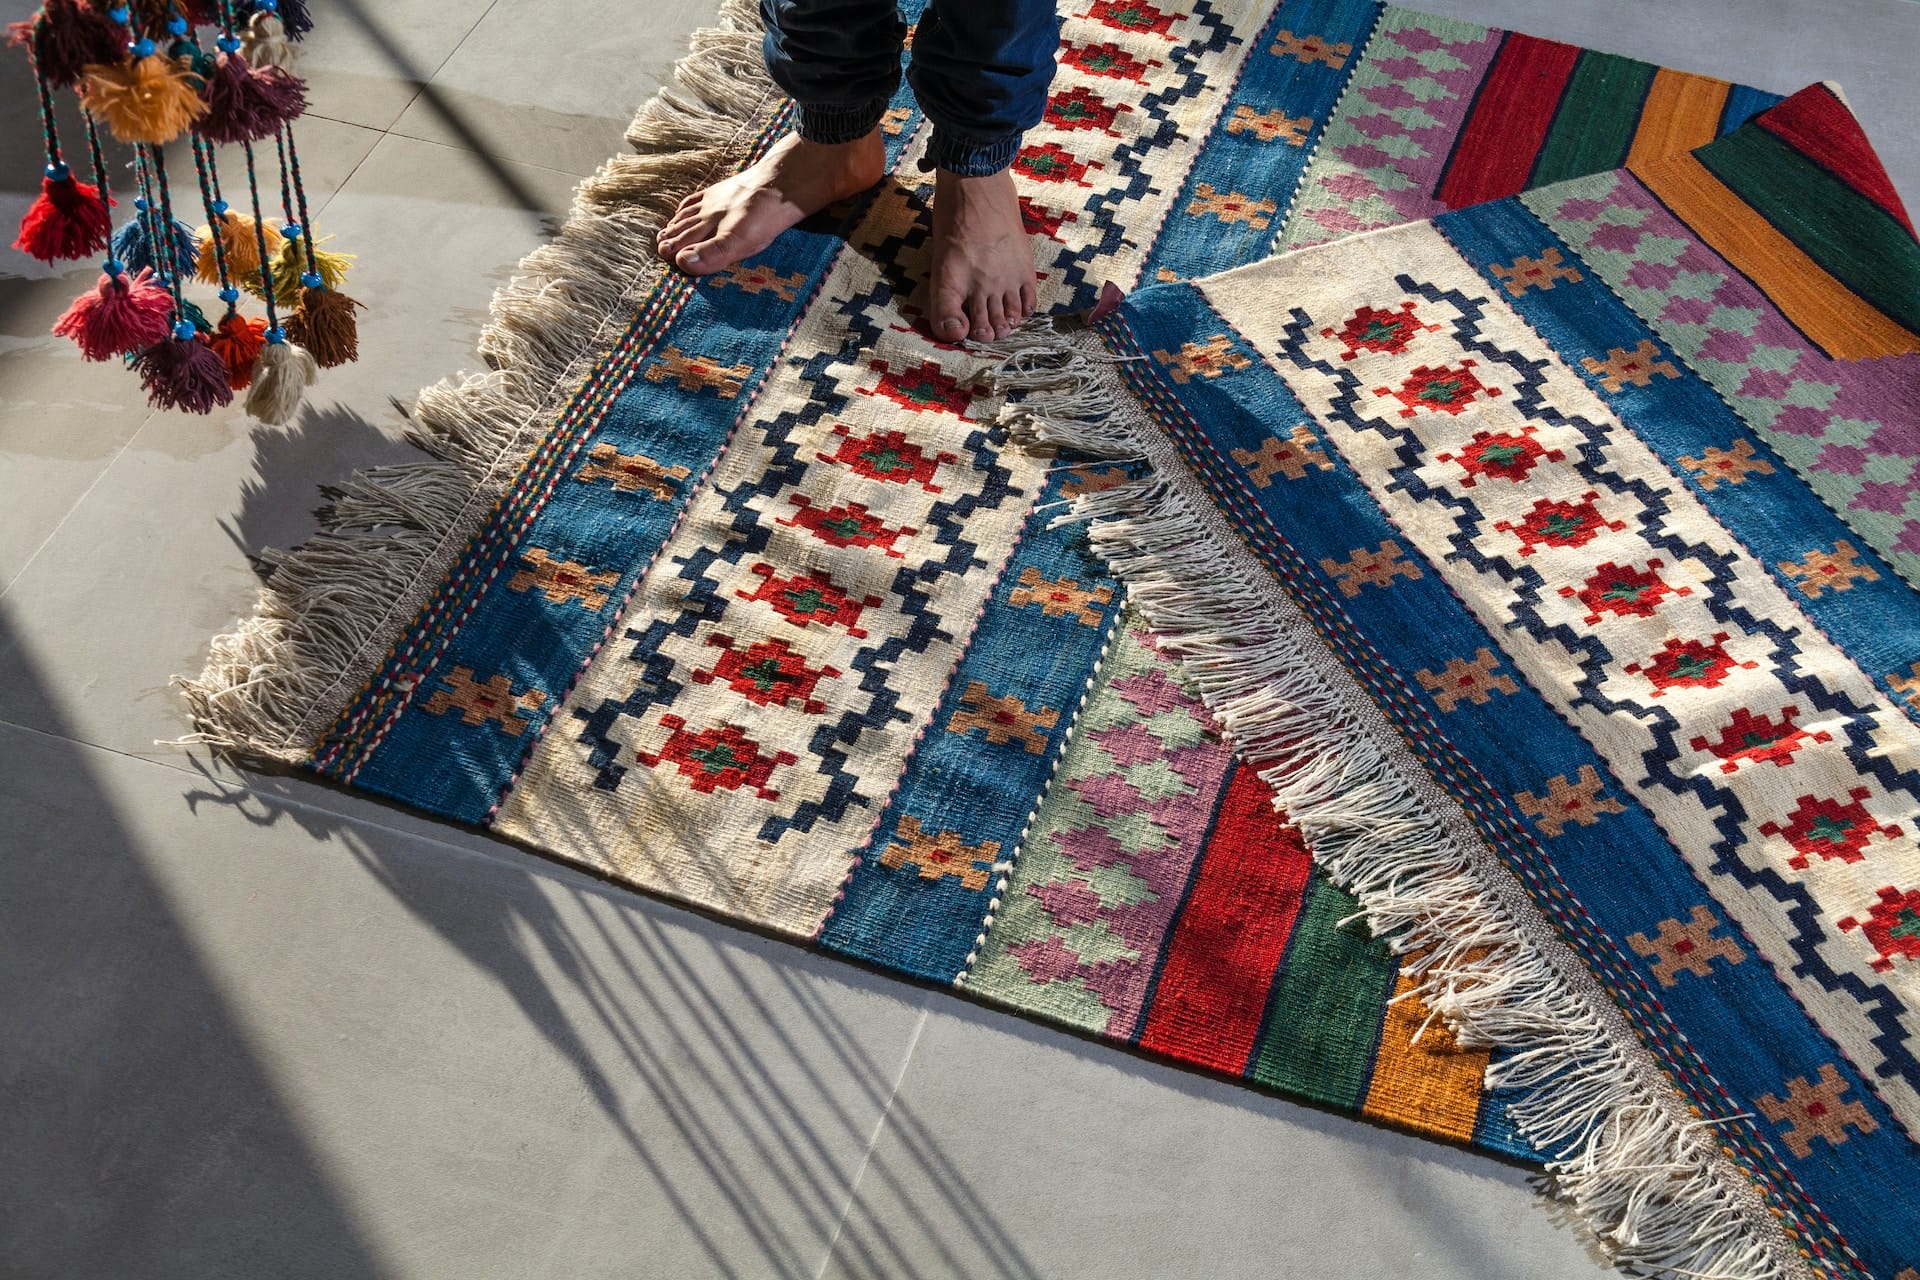 How to Clean Area Rugs Yourself: Your Handy DIY Guide